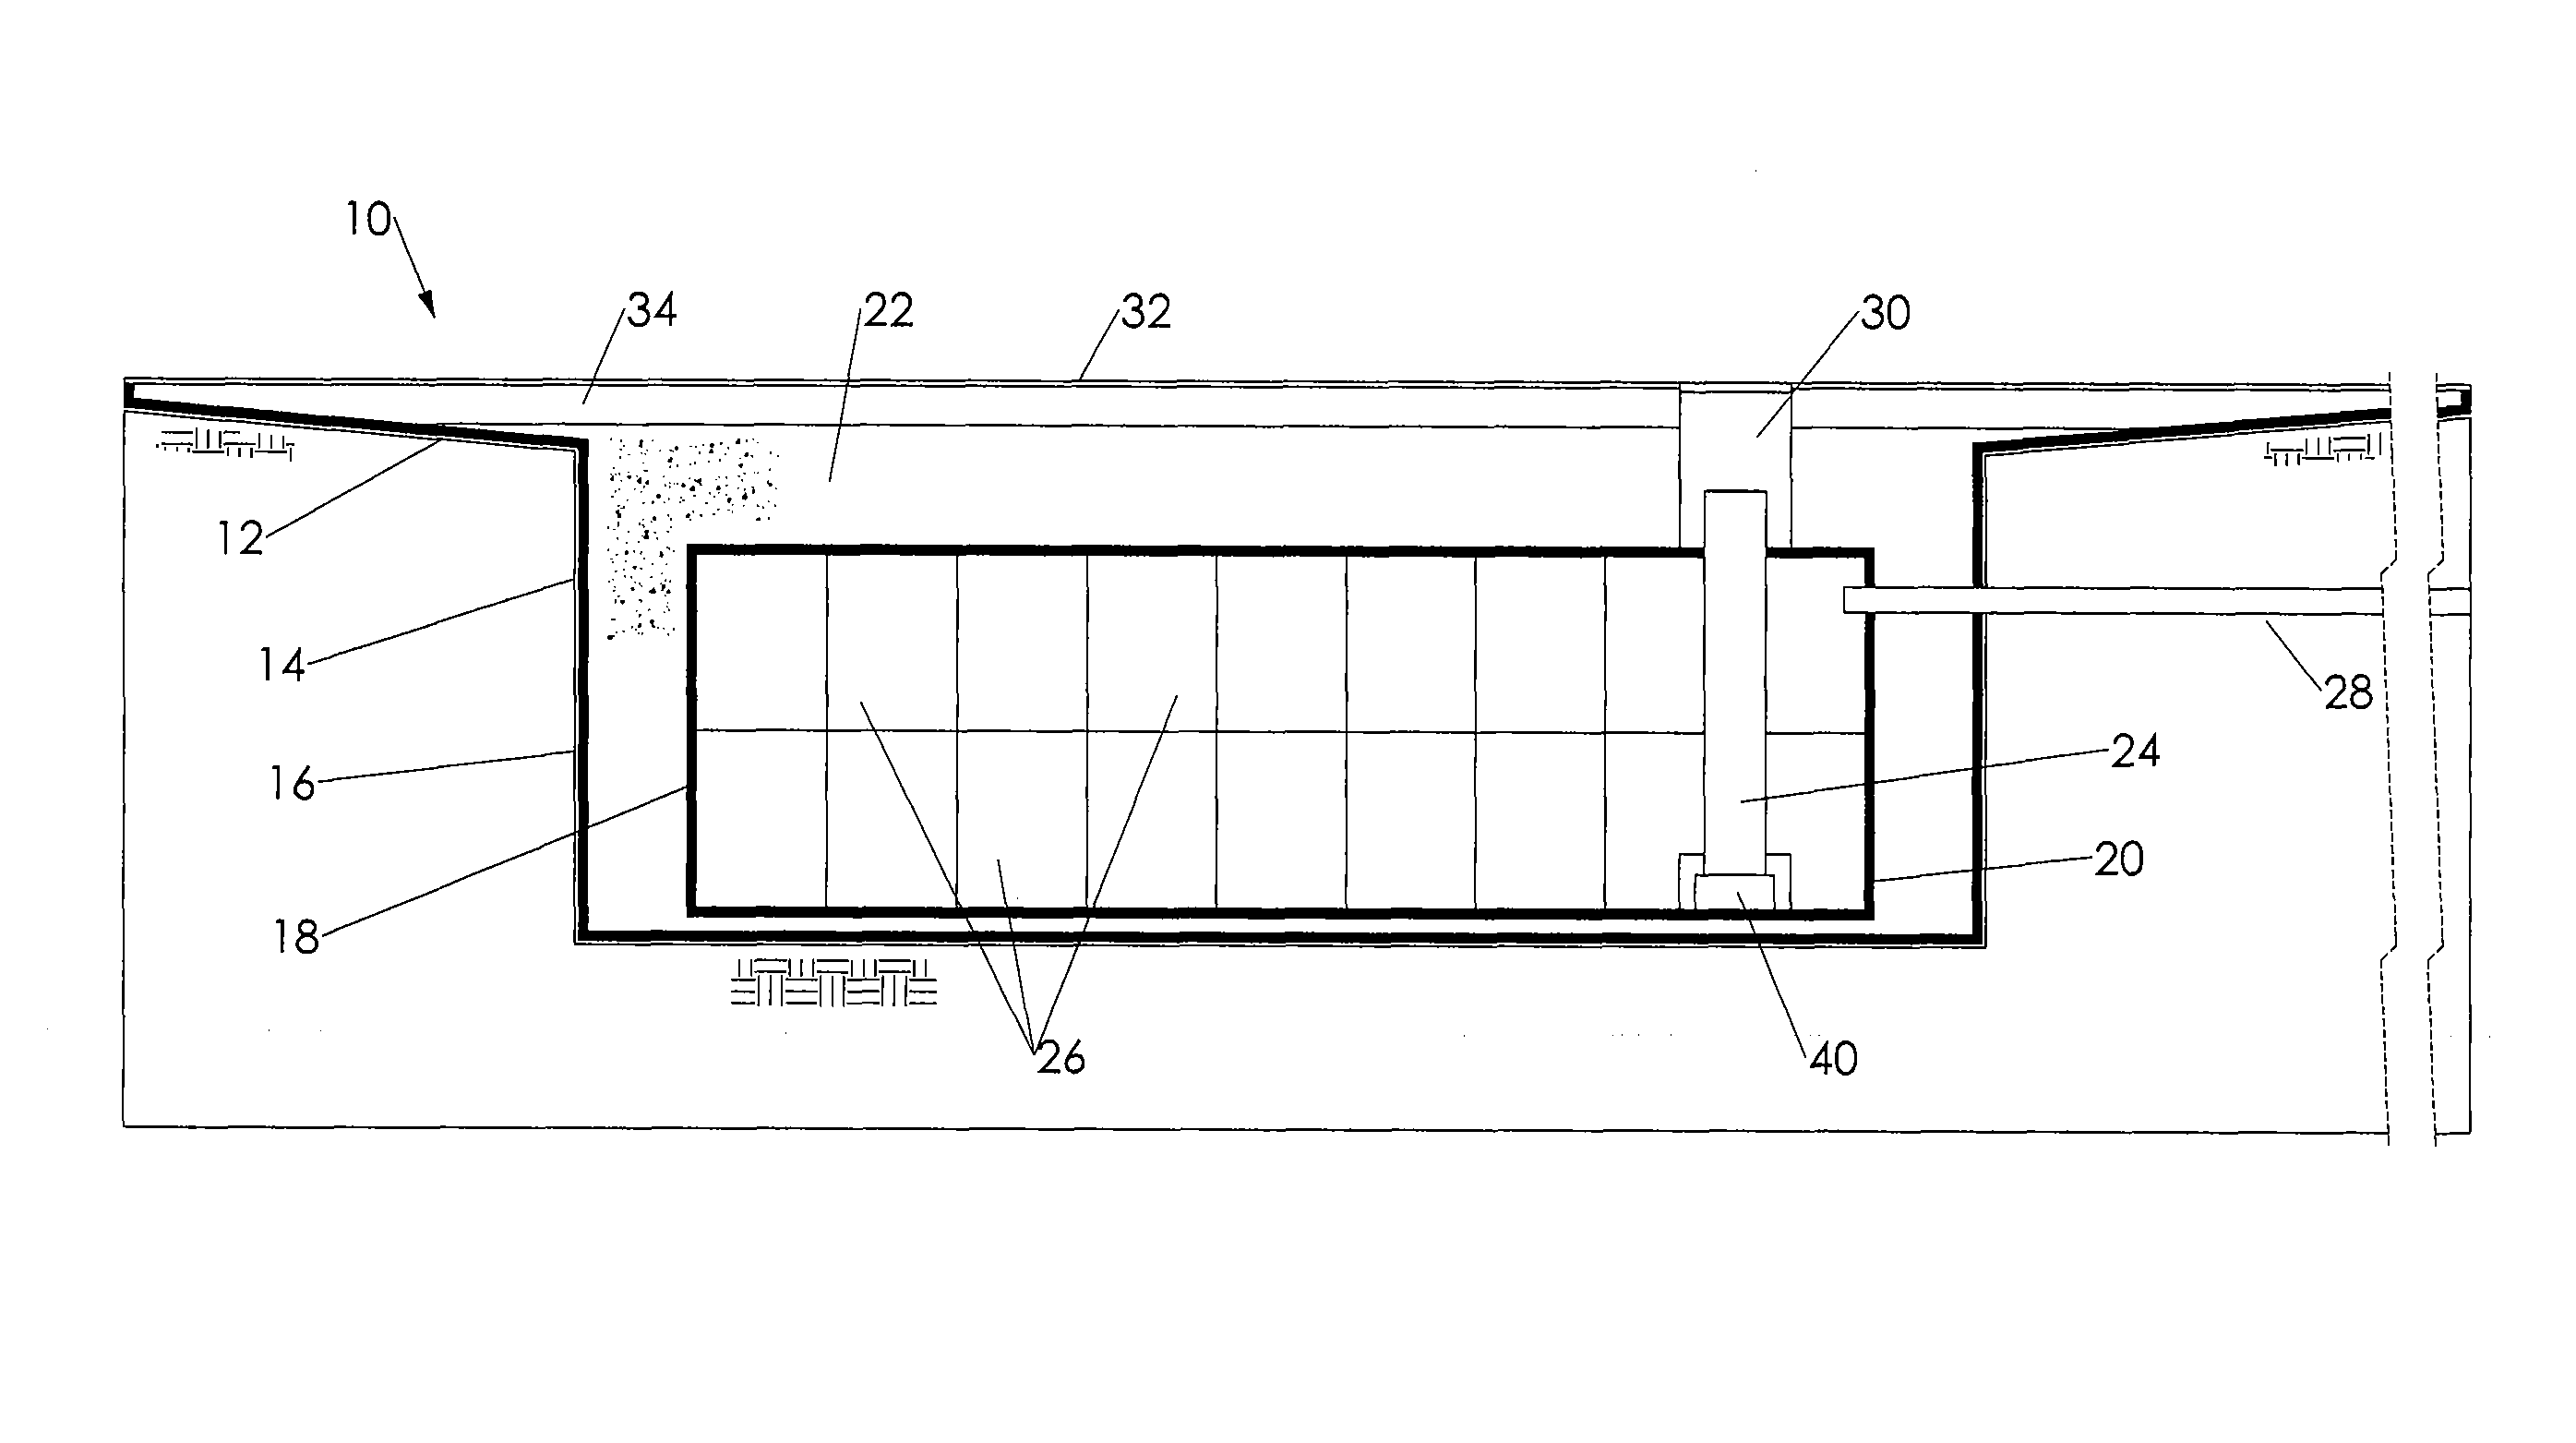 Water drainage and harvesting system for an artificial turf environment